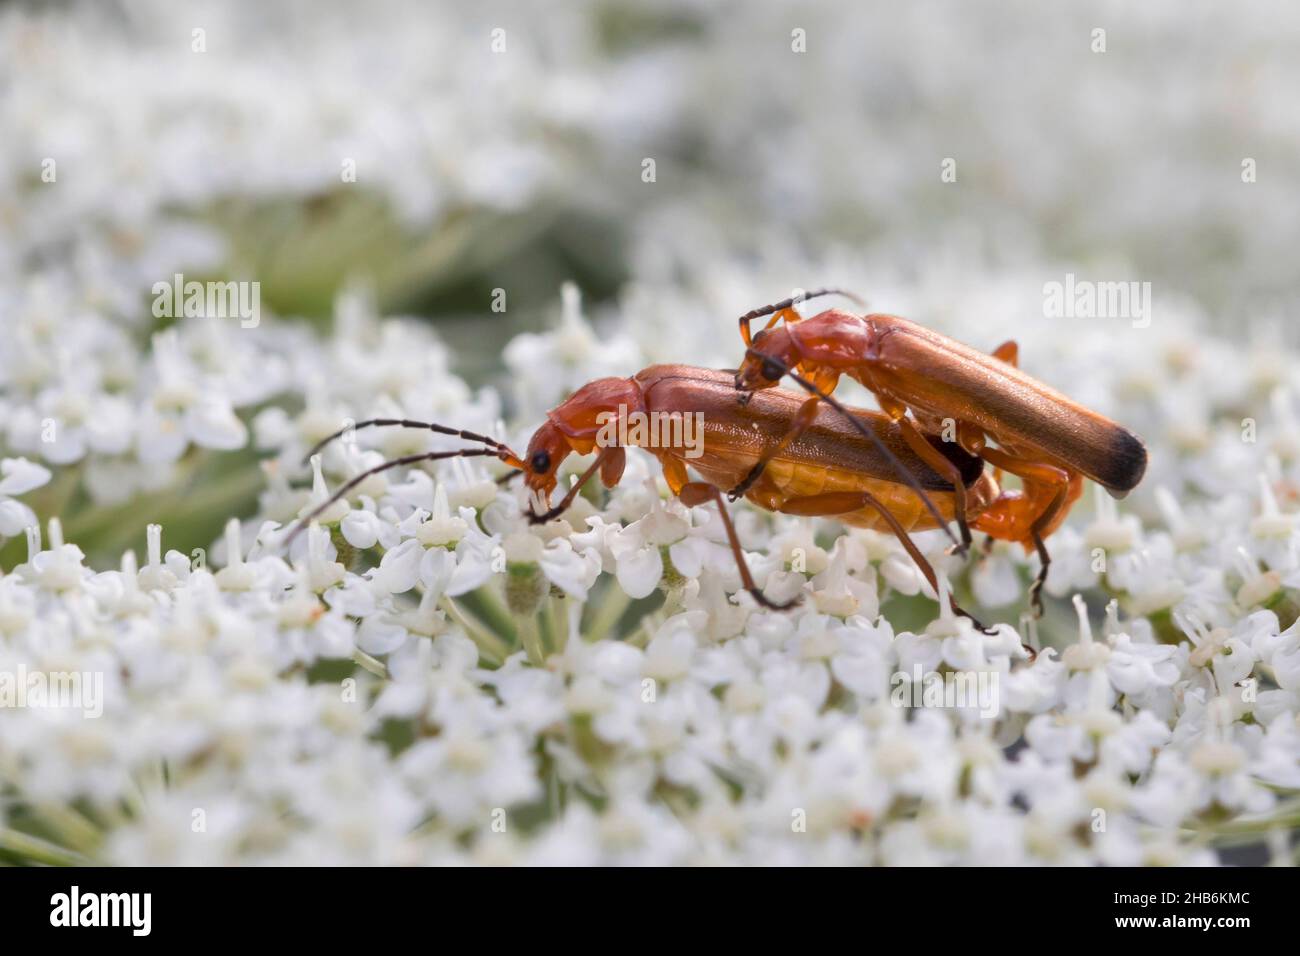 black-tipped soldier beetle (Rhagonycha fulva), mating on an umbellifer, Germany Stock Photo